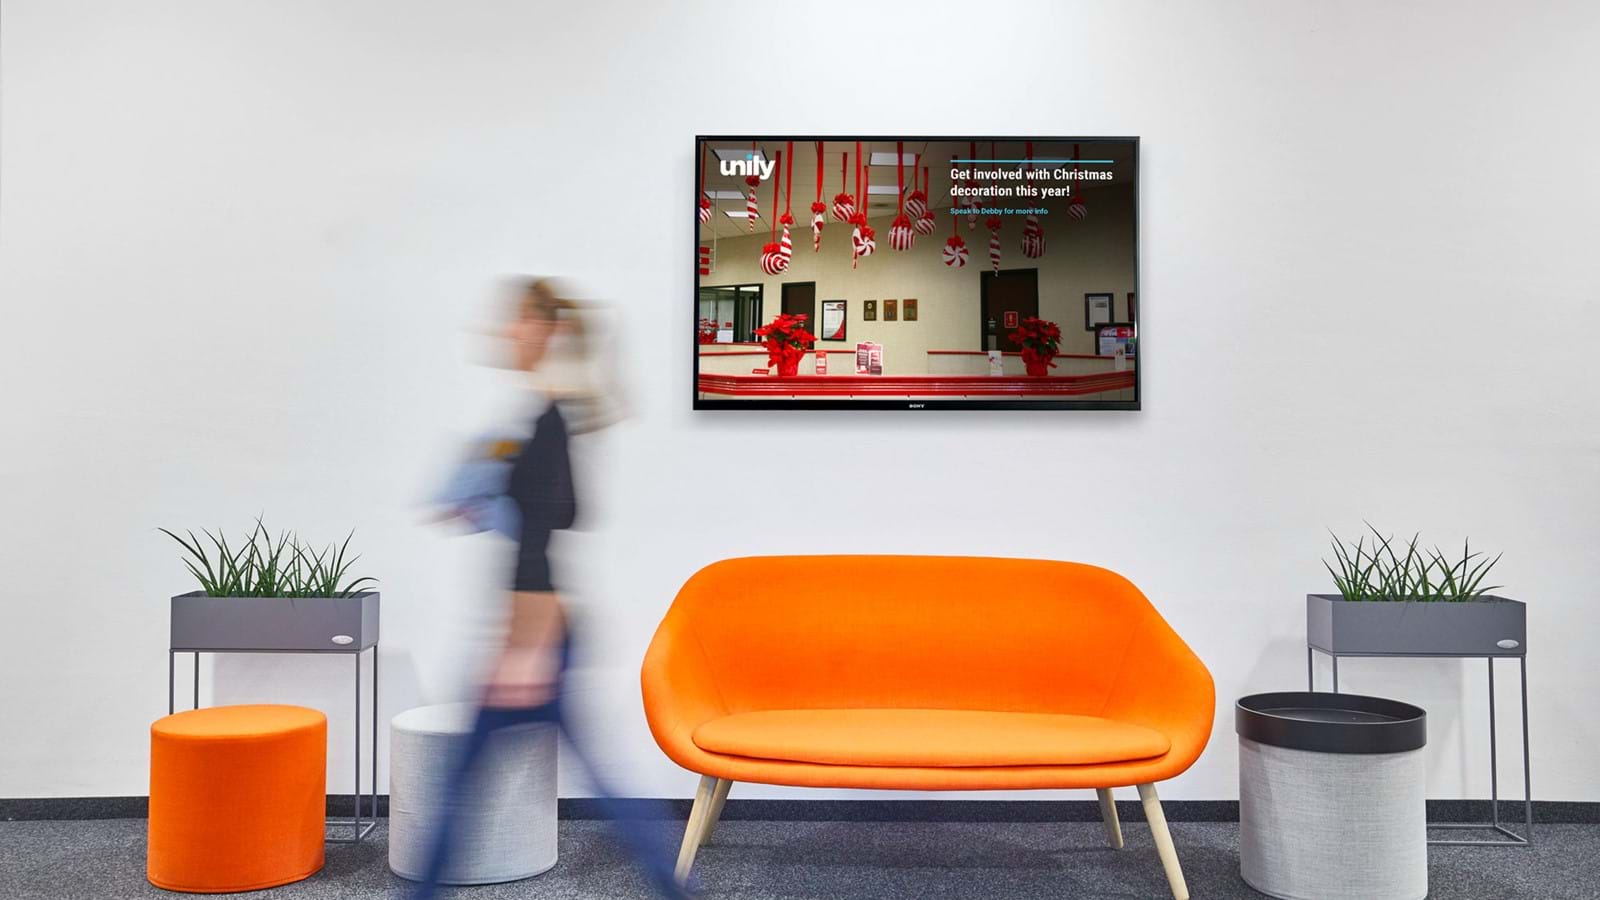 Digital signage using intranets in the modern world